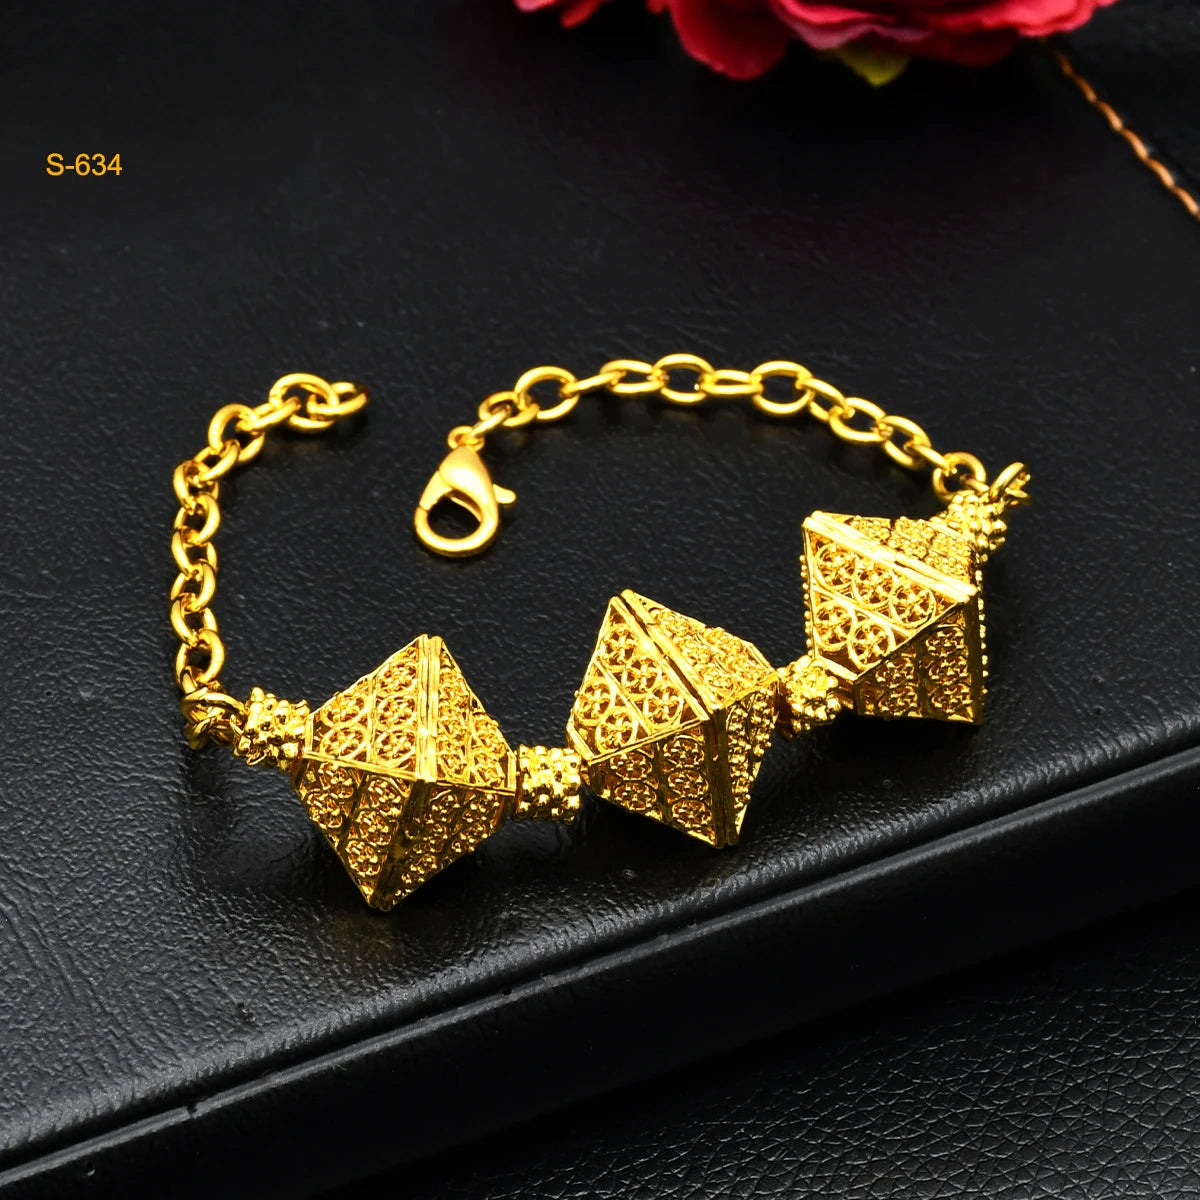 Fashion Dubai Gold Plated Jewelry Set for Women Nigeria Wedding Necklace Earrings Bracelet Ring Bridal Jewellry Accessories 24K - Hiron Store